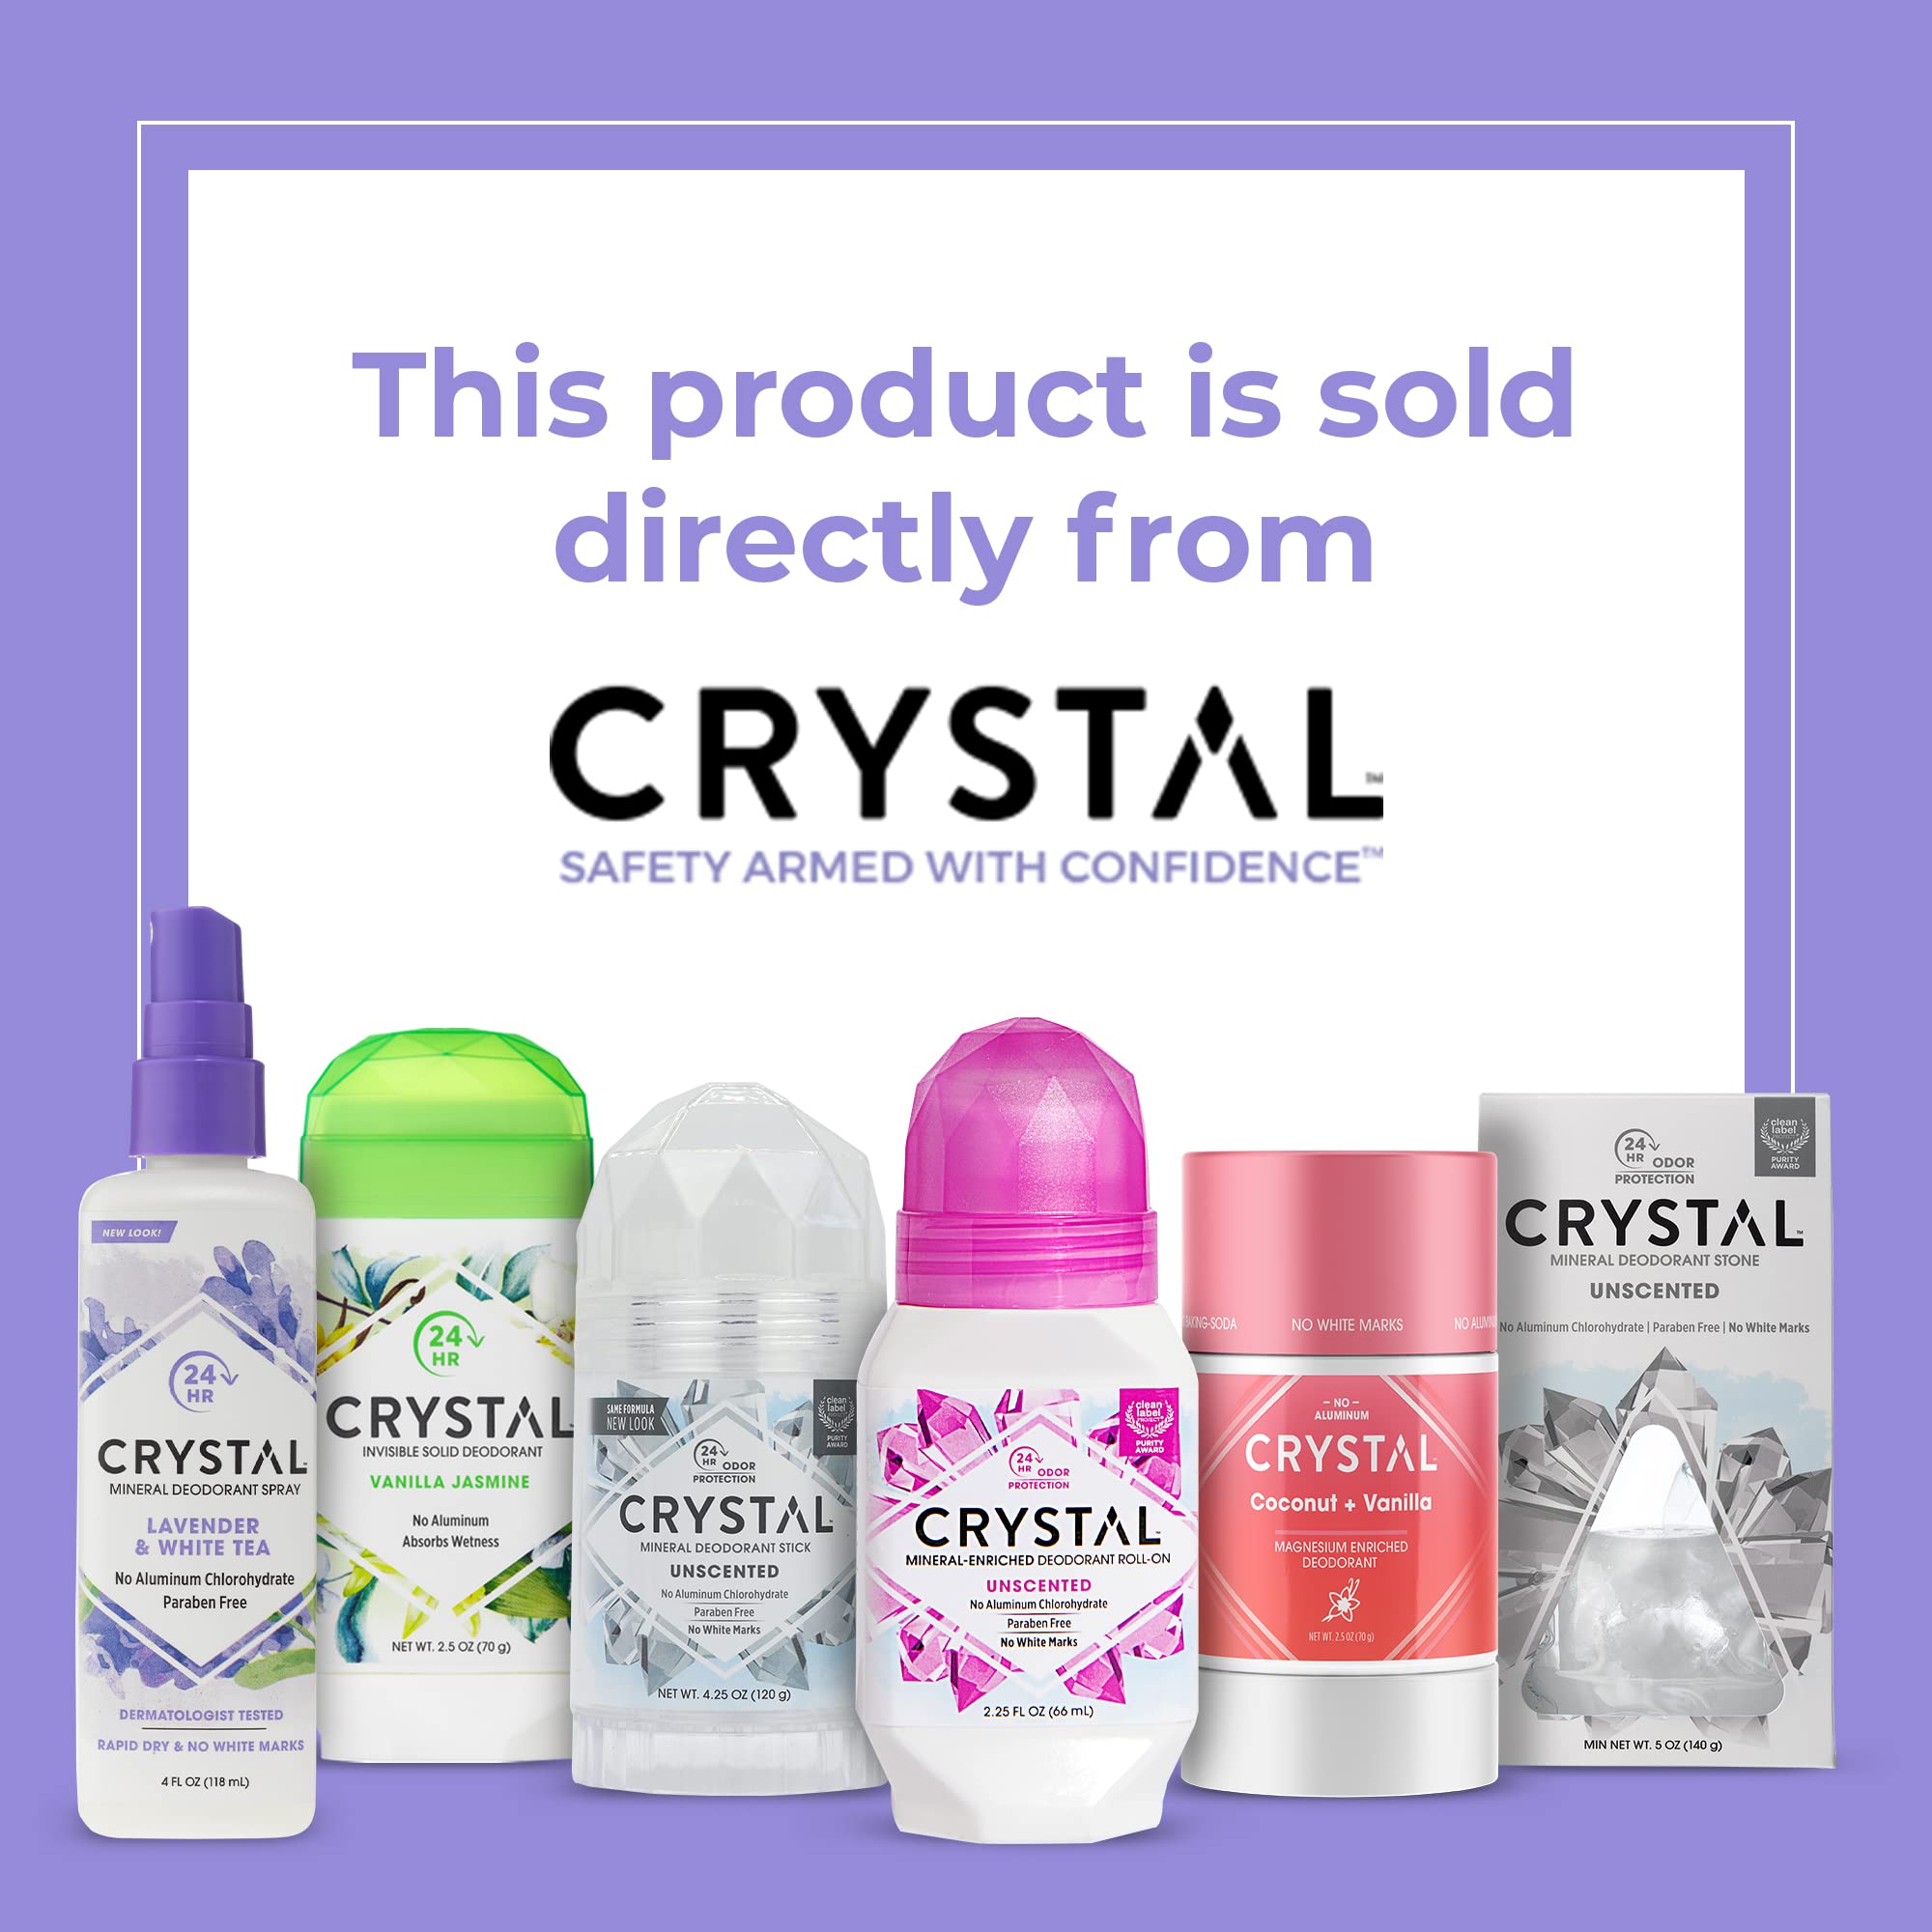 CRYSTAL™ Travel Stick Mineral Deodorant - Unscented Body Deodorant With 24-Hour Odor Protection, Non-Staining & Non-Sticky, Aluminum Chloride & Paraben Free, 1.5 FL OZ – (Pack of 2)